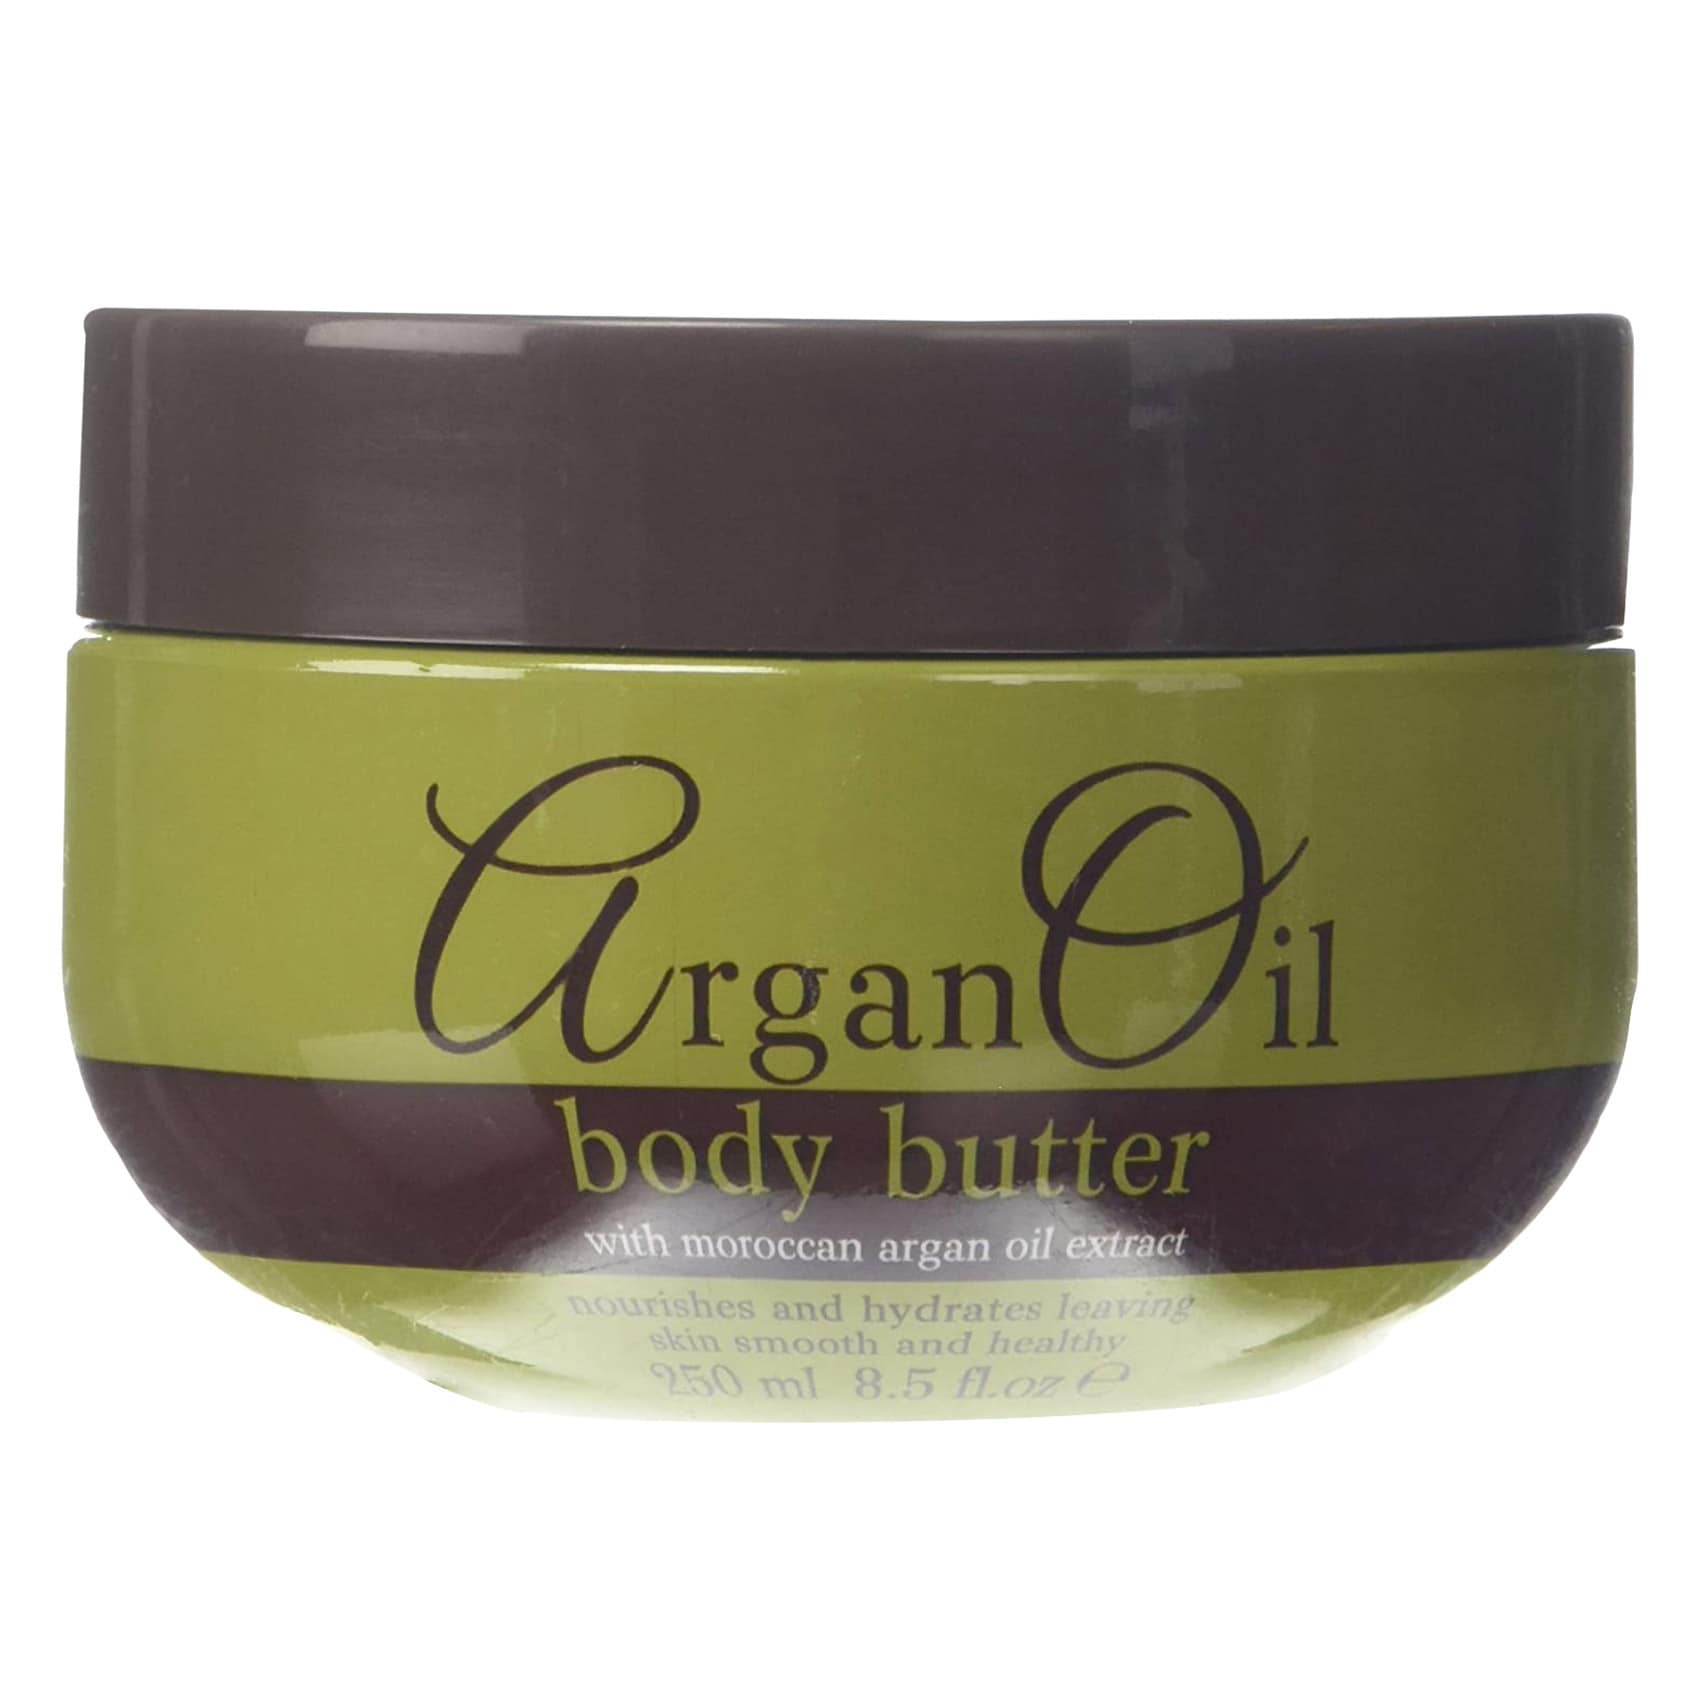 Buy Argan Oil Body Butter Hydrating Nourishing Cleansing With Moroccan Argan Oil Extract 250 Ml Online - Beauty & Personal on Carrefour Jordan